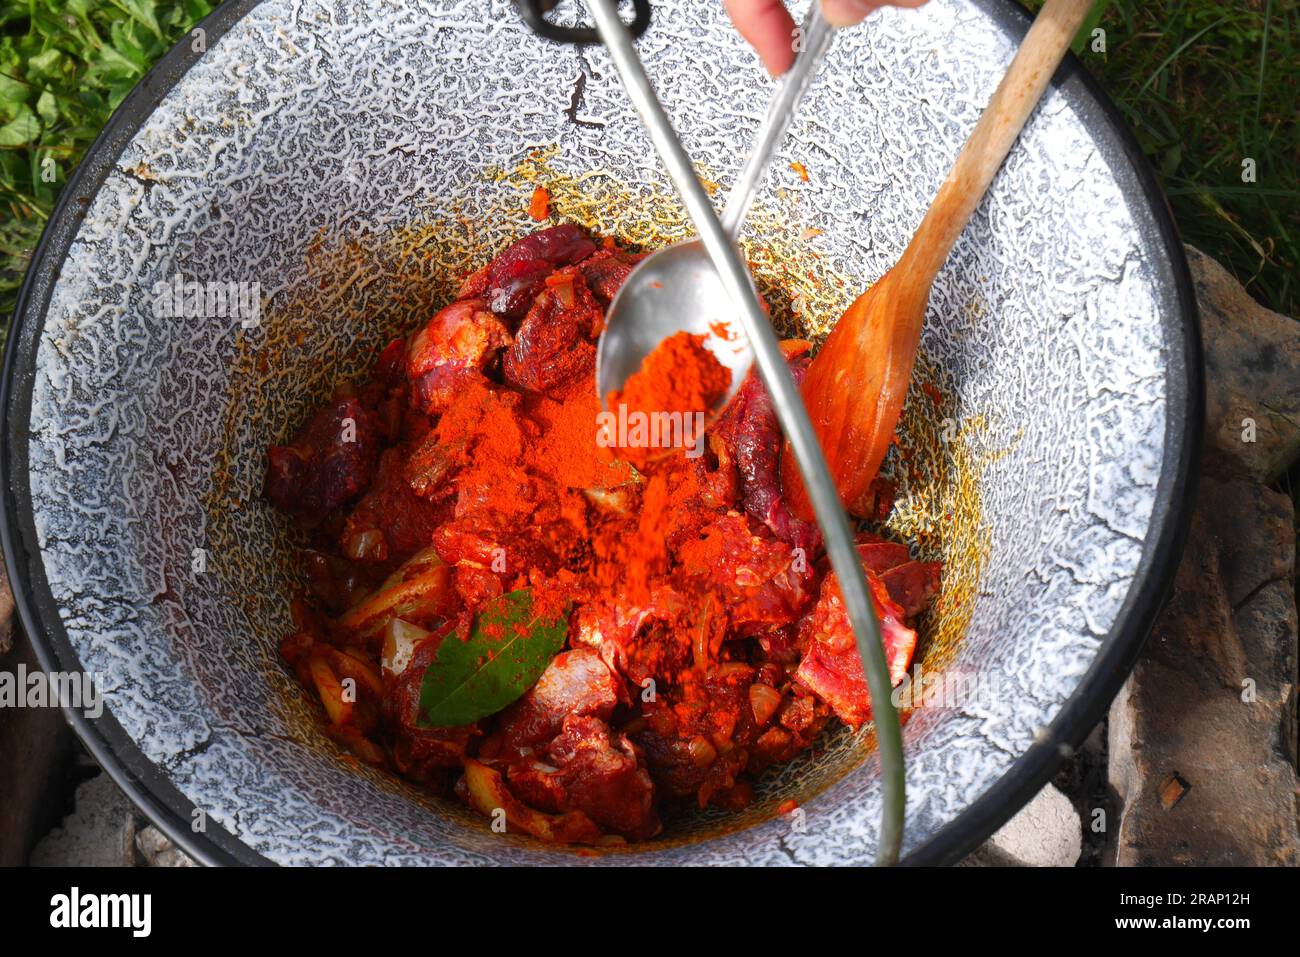 Making Hungarian Gulyas in a cauldron, Bogracs, , in the garden, adding the paprika powder Stock Photo